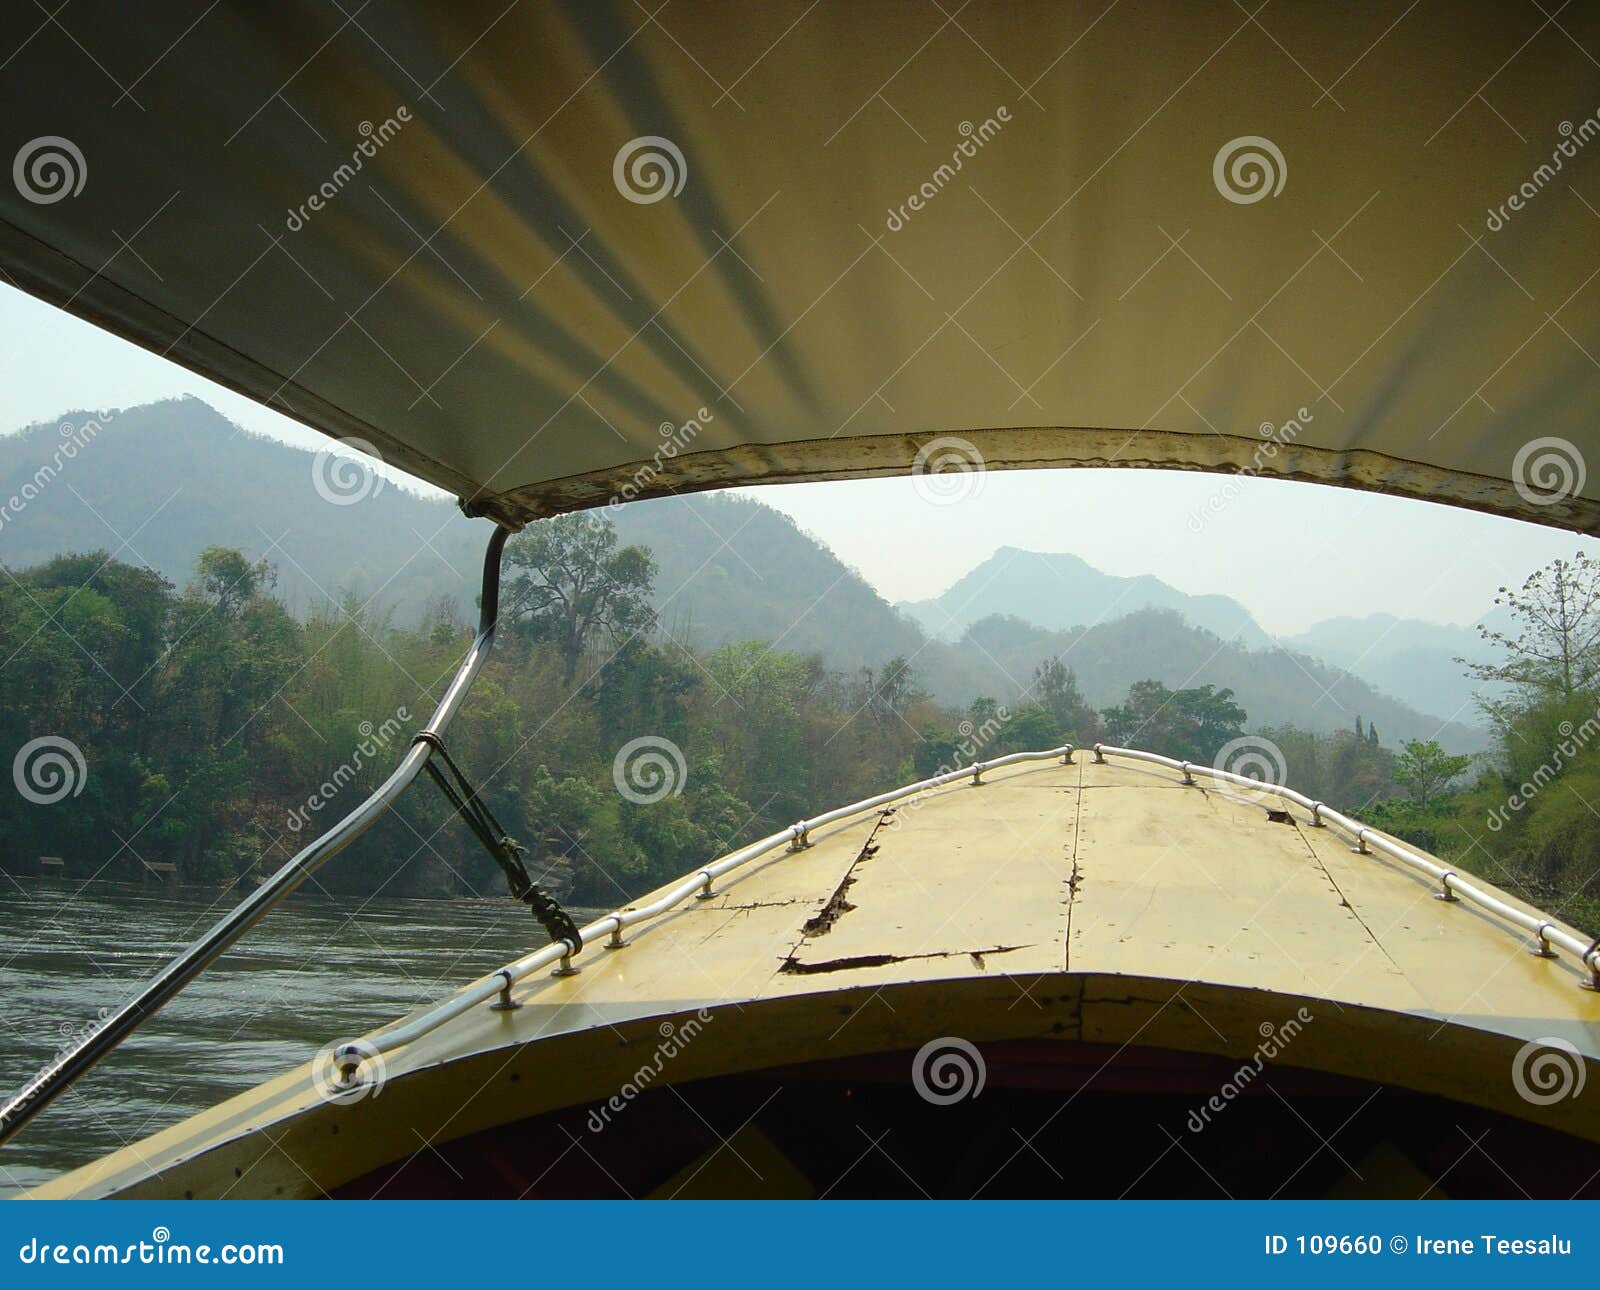 boatrip on the river kwai